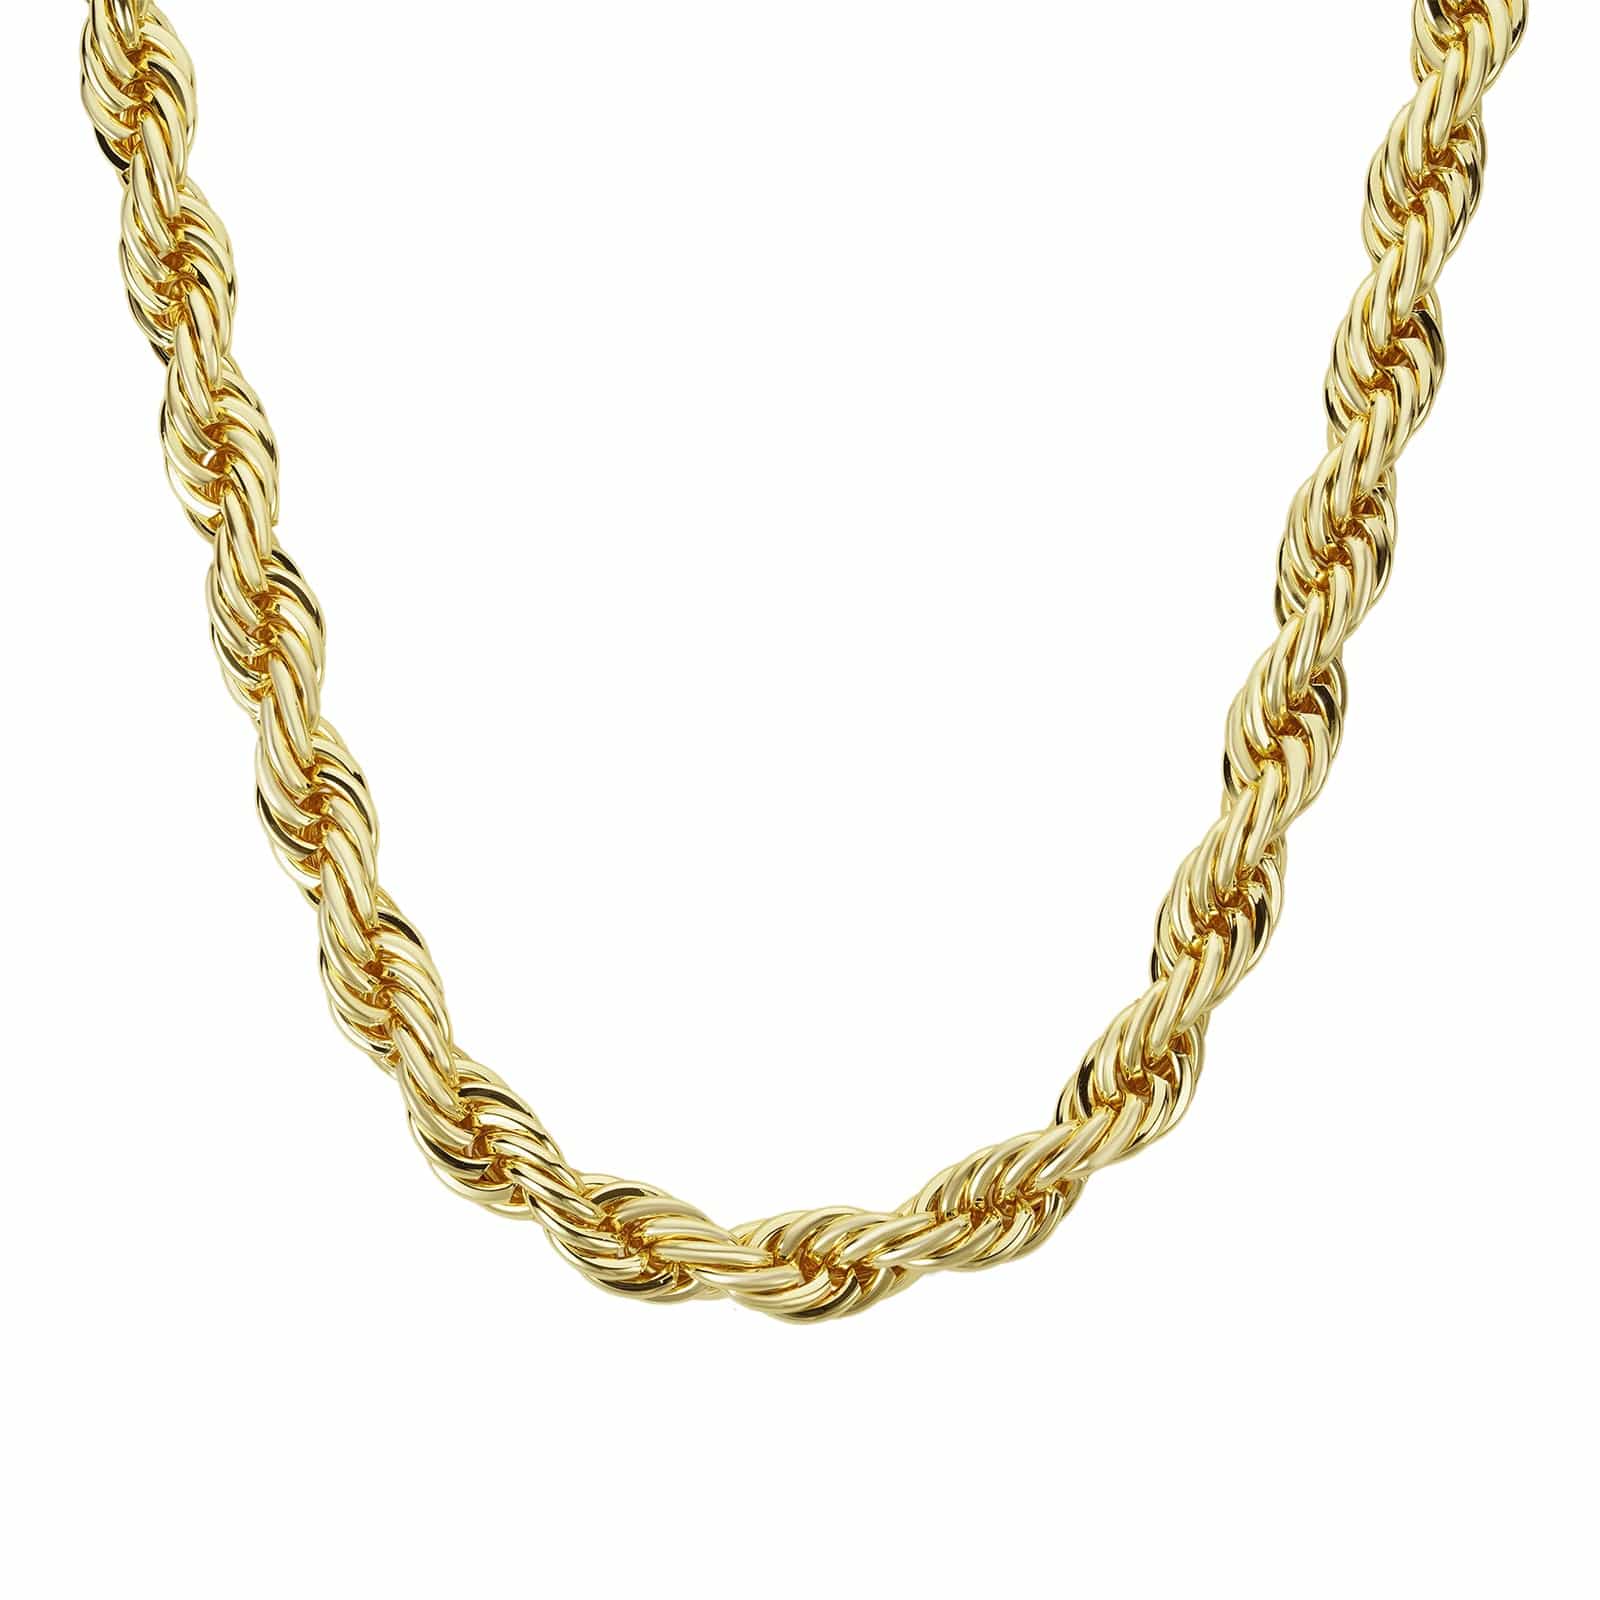 18k Gold-Bonded Chains Rope Chain 8mm - Gold